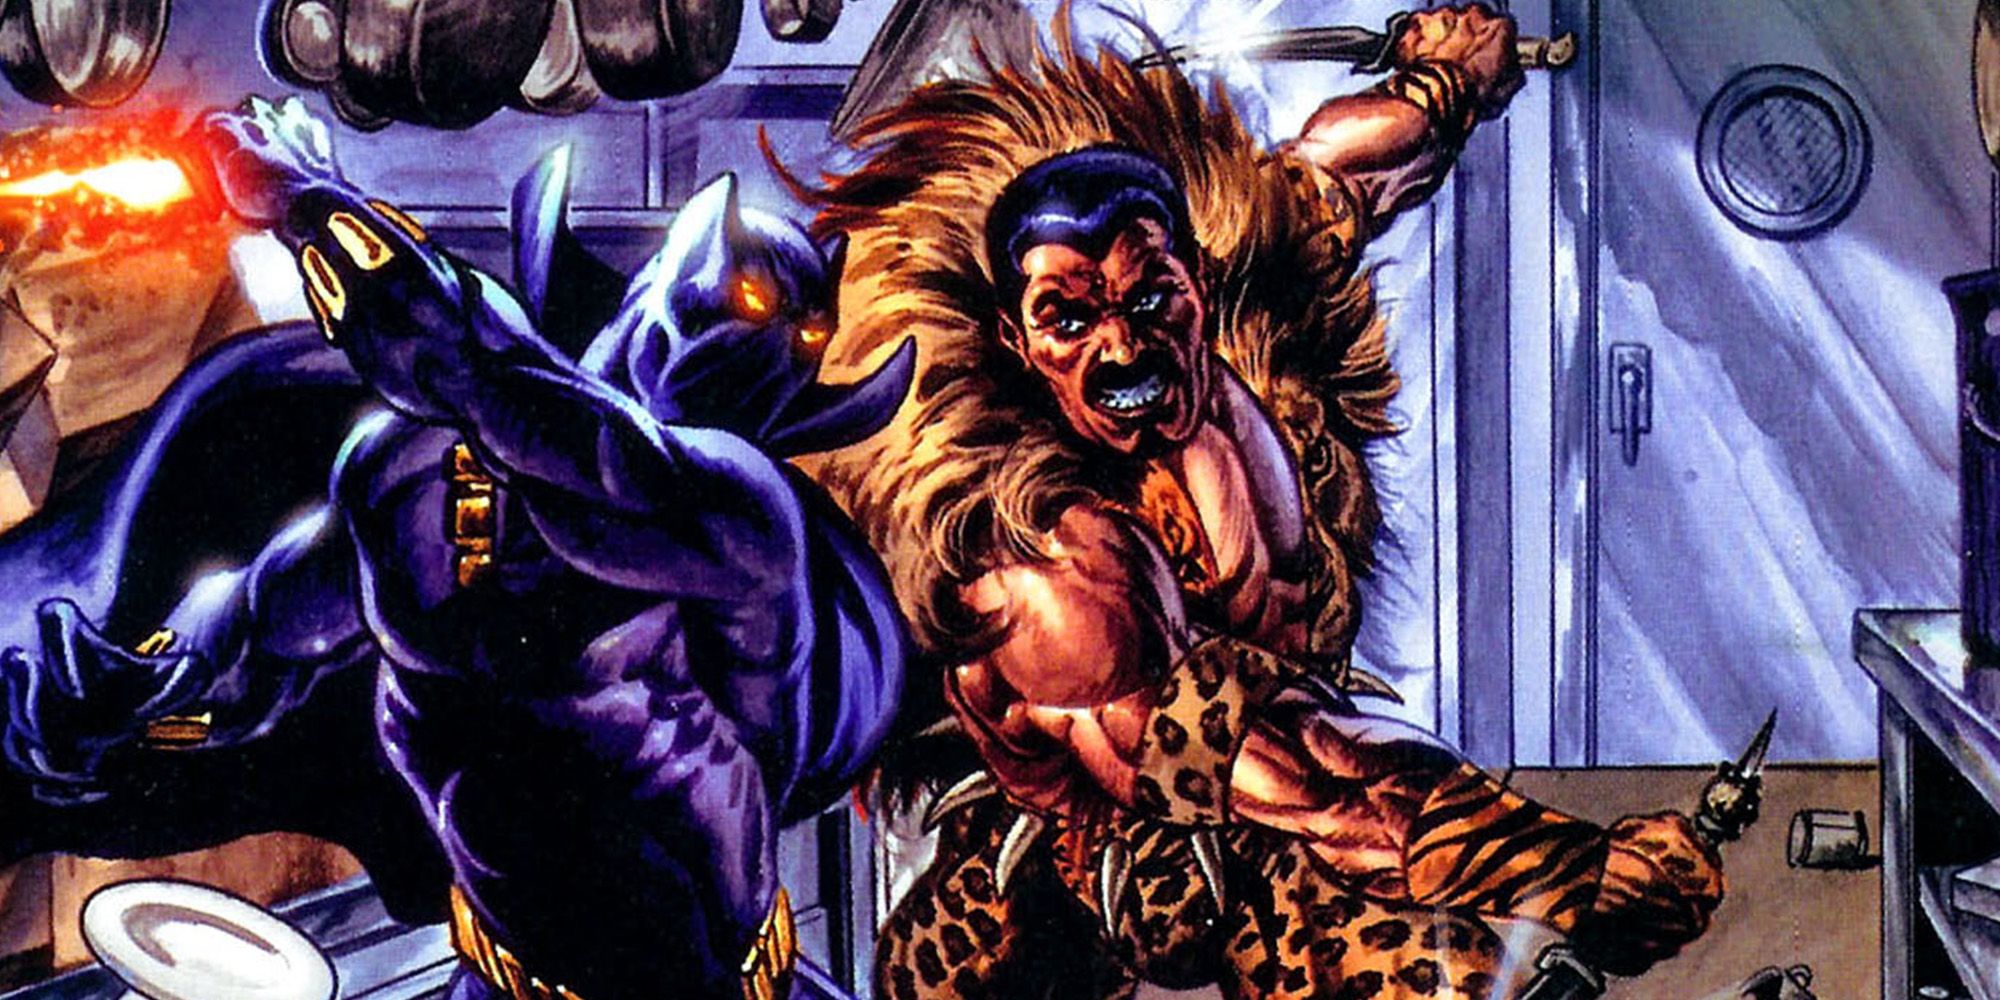 Kraven the Hunter brawls with Black Panther in a kitchen. 